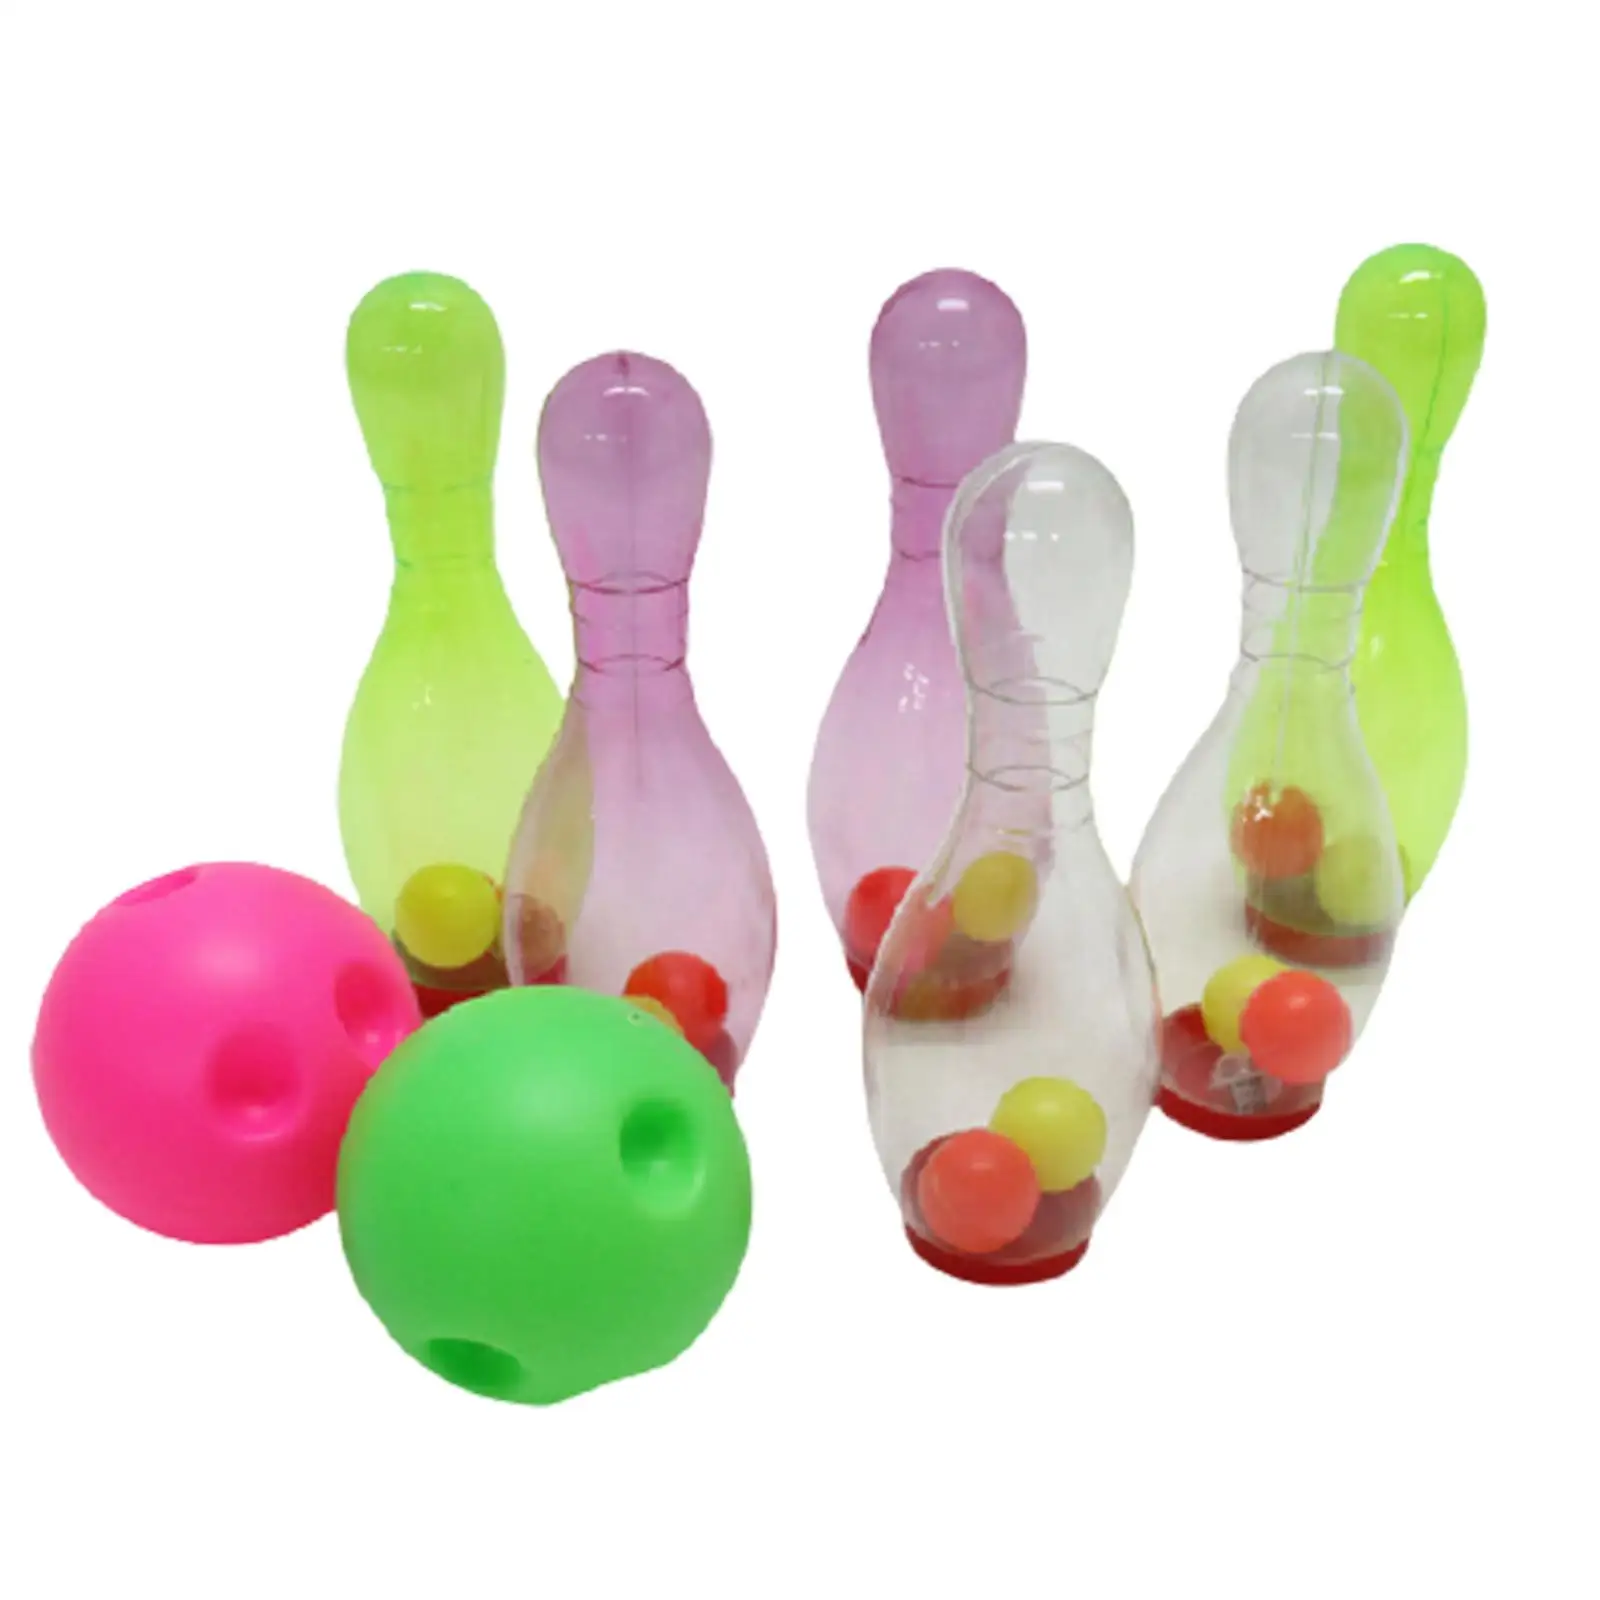 Kids Bowling Play Set Light up sports Games for Indoor Outdoor Games